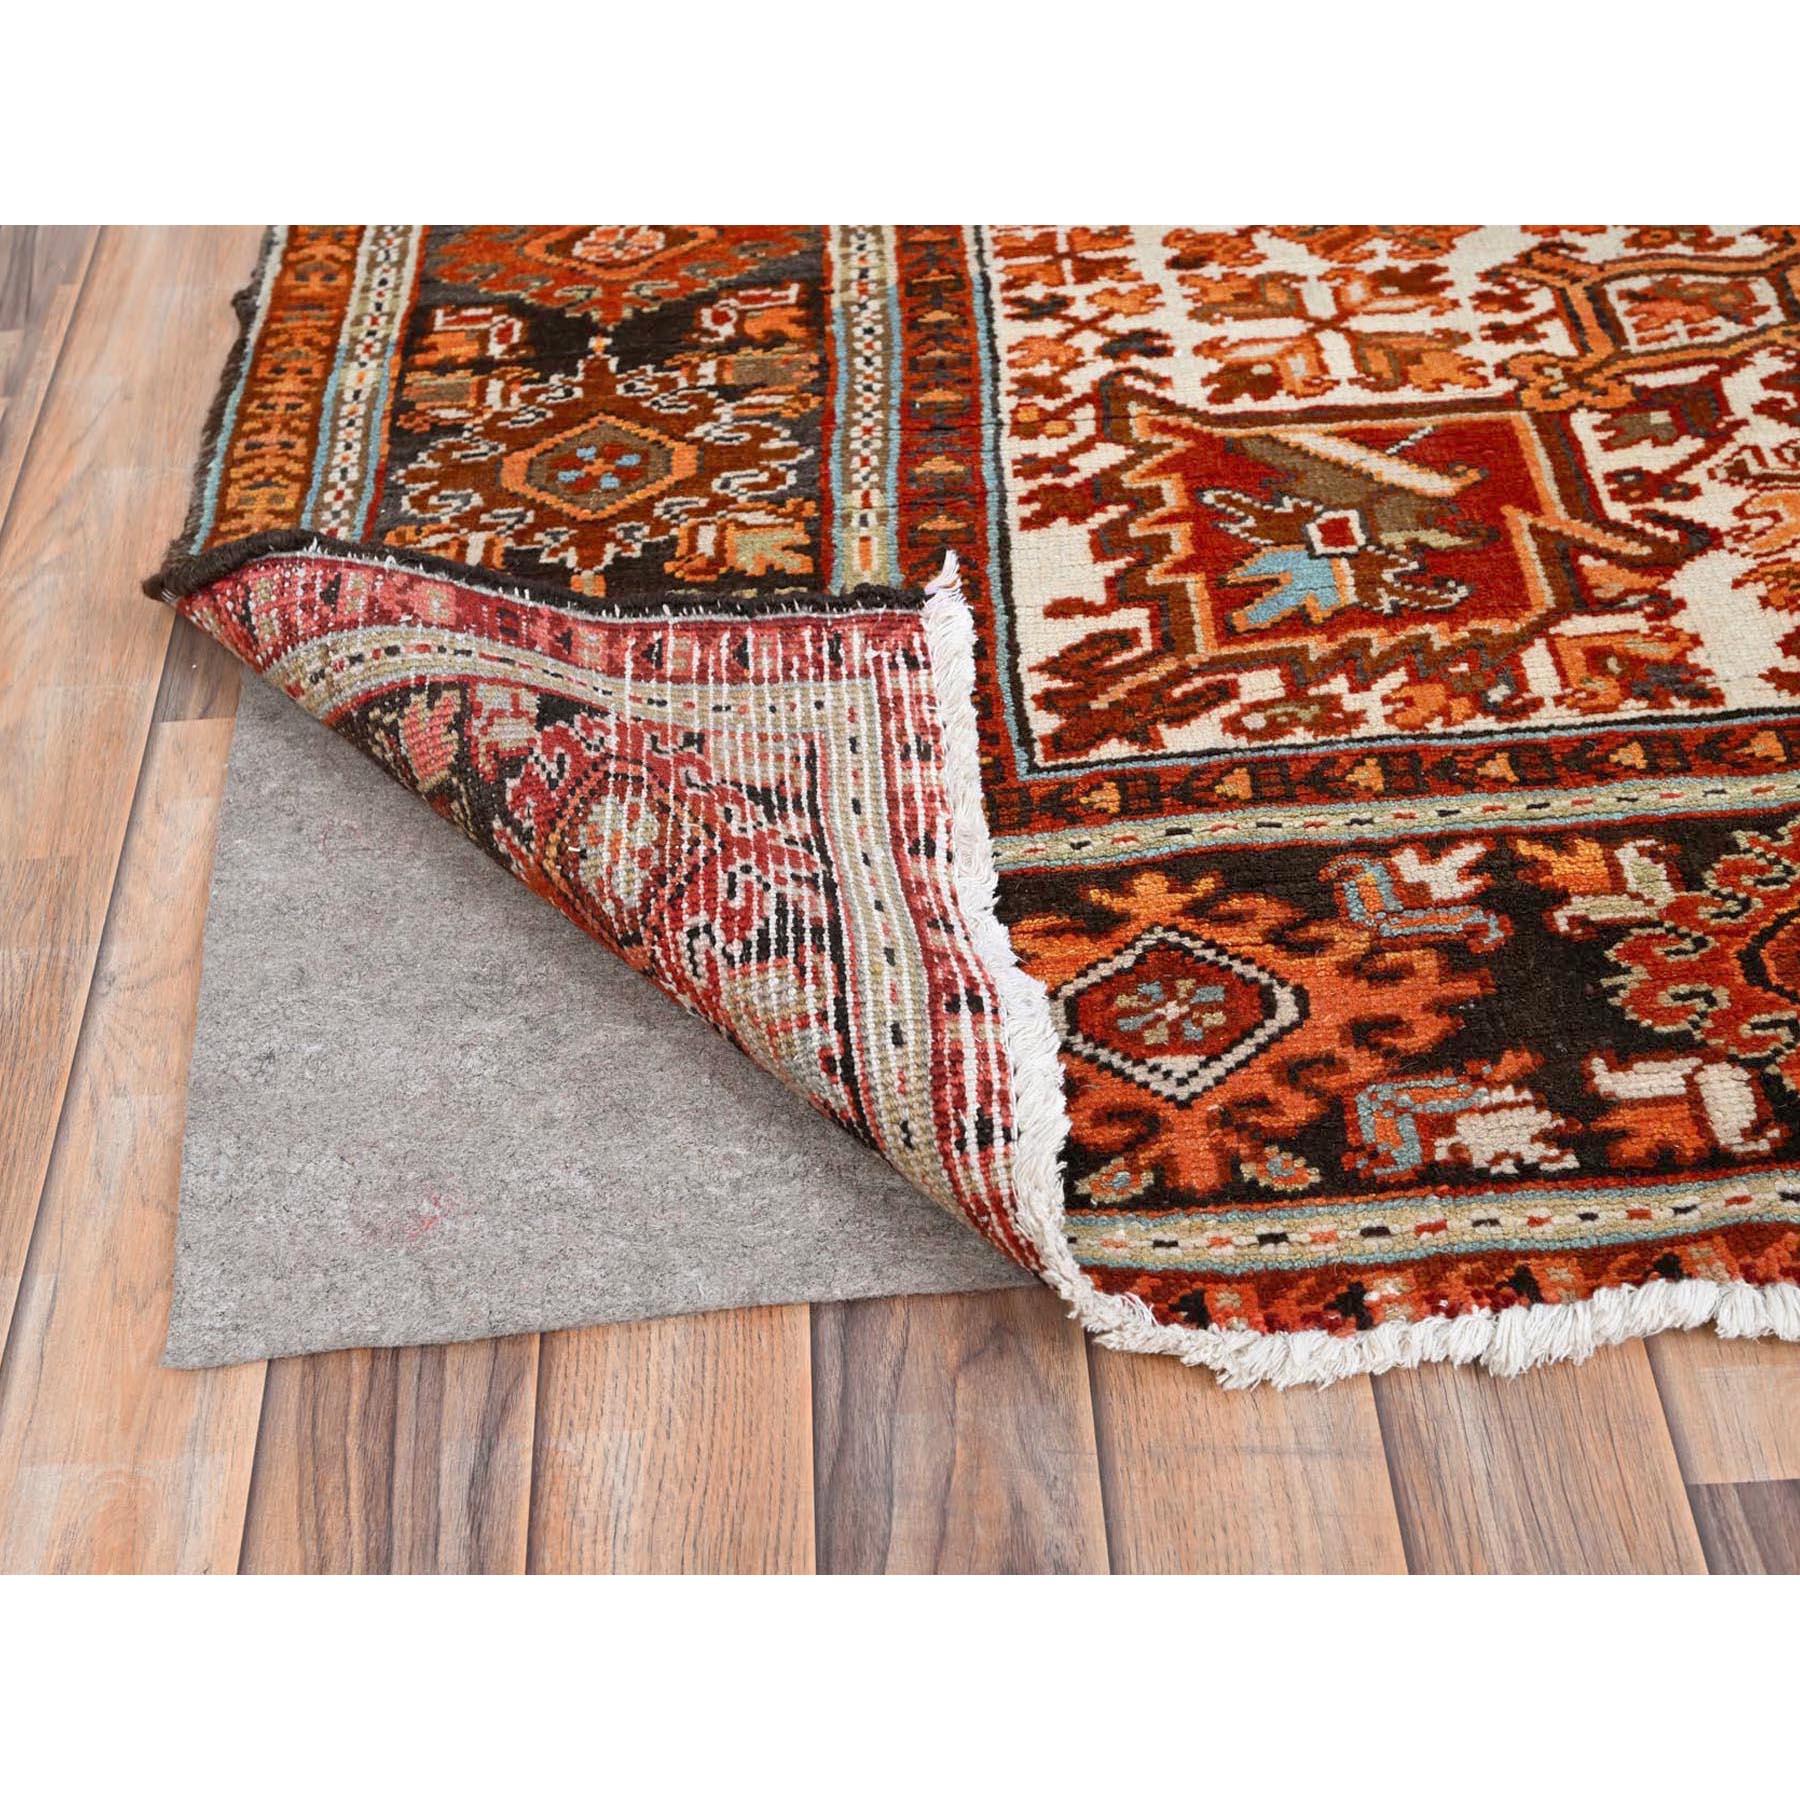 Mid-20th Century Alloy Orange Vntage Persian Heriz Rustic Feel Worn Wool Hand Knotted Rug For Sale